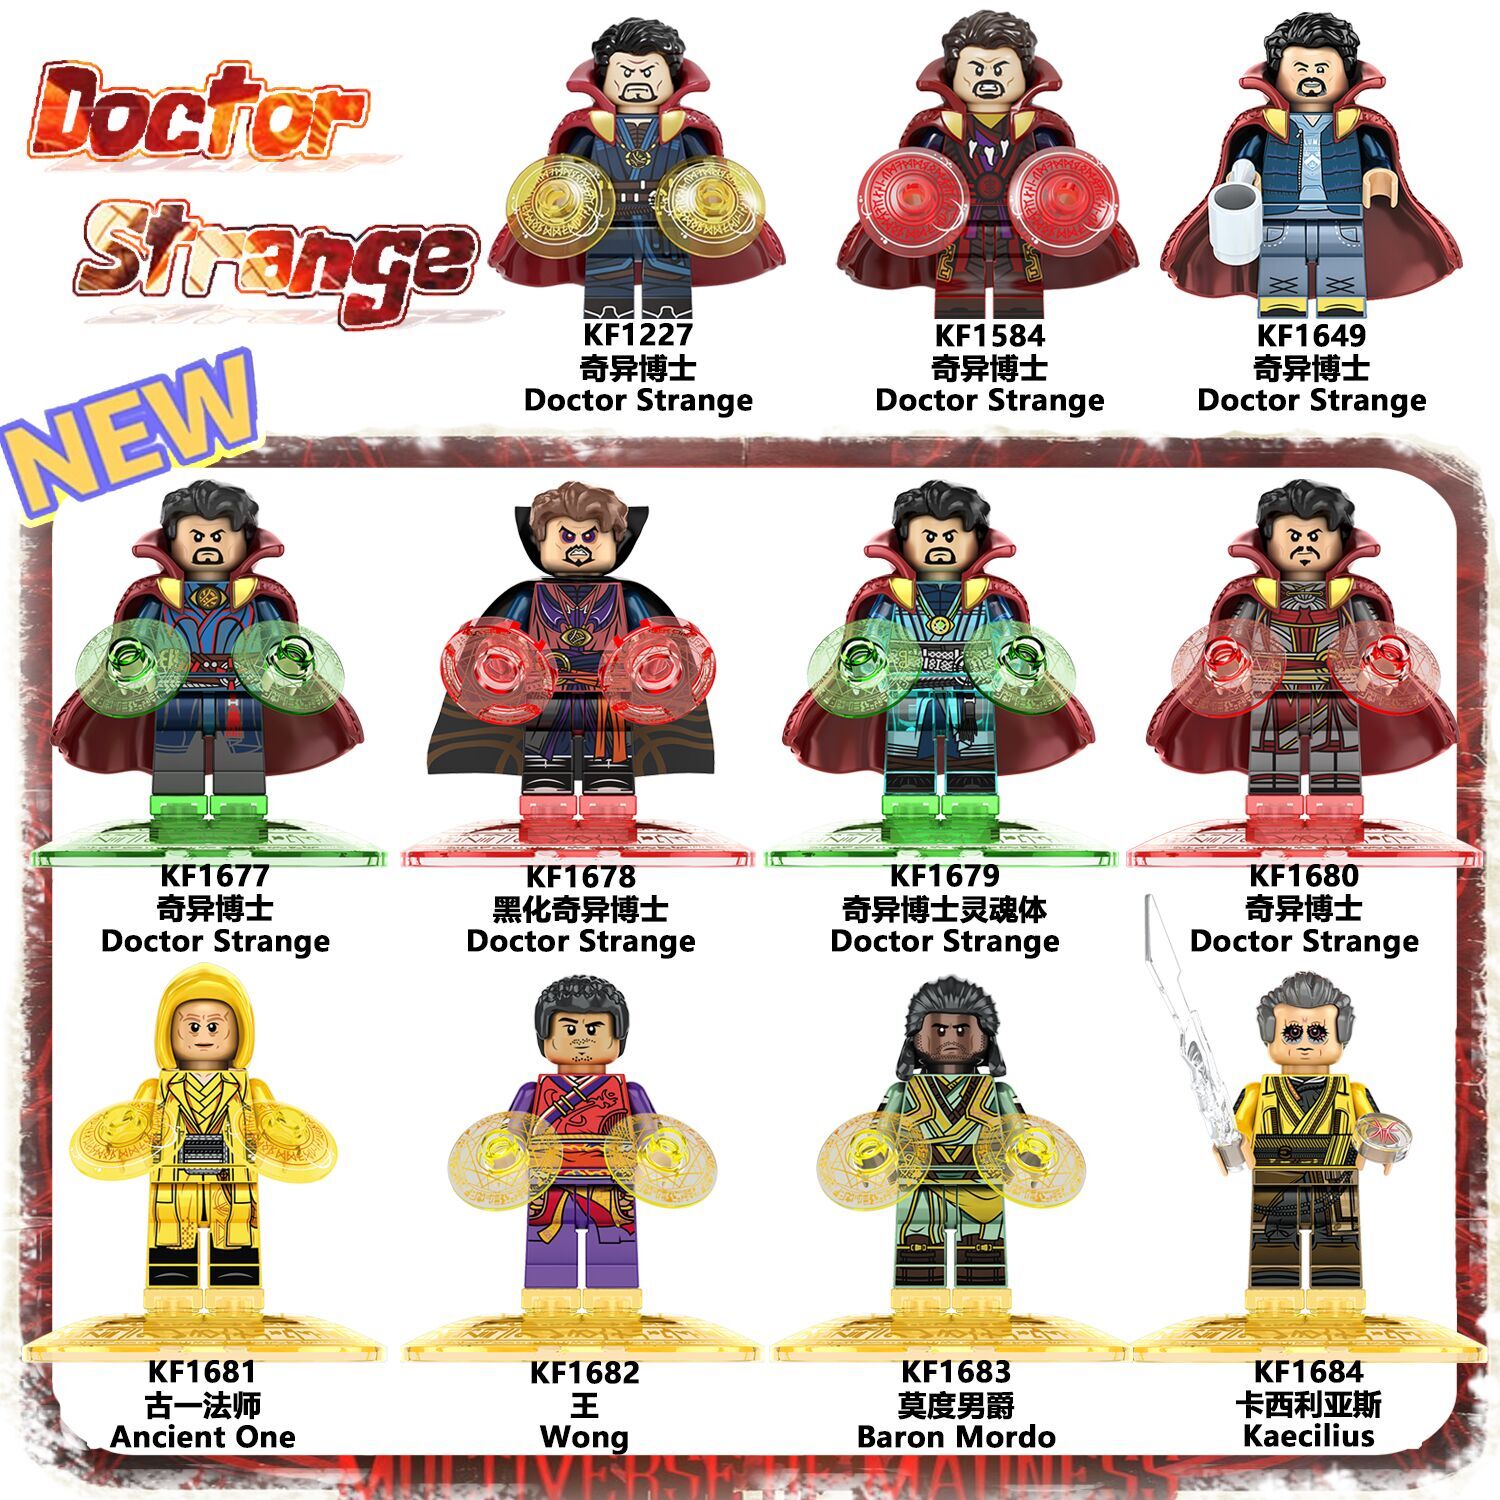 KF6157 KF1677 KF1678 KF1679 KF1680 KF1681 KF1682 KF1683 KF1684 The Avengers Doctor Strange Movie Series Building Blocks Action Figures Educational Toys For Kids Gifts